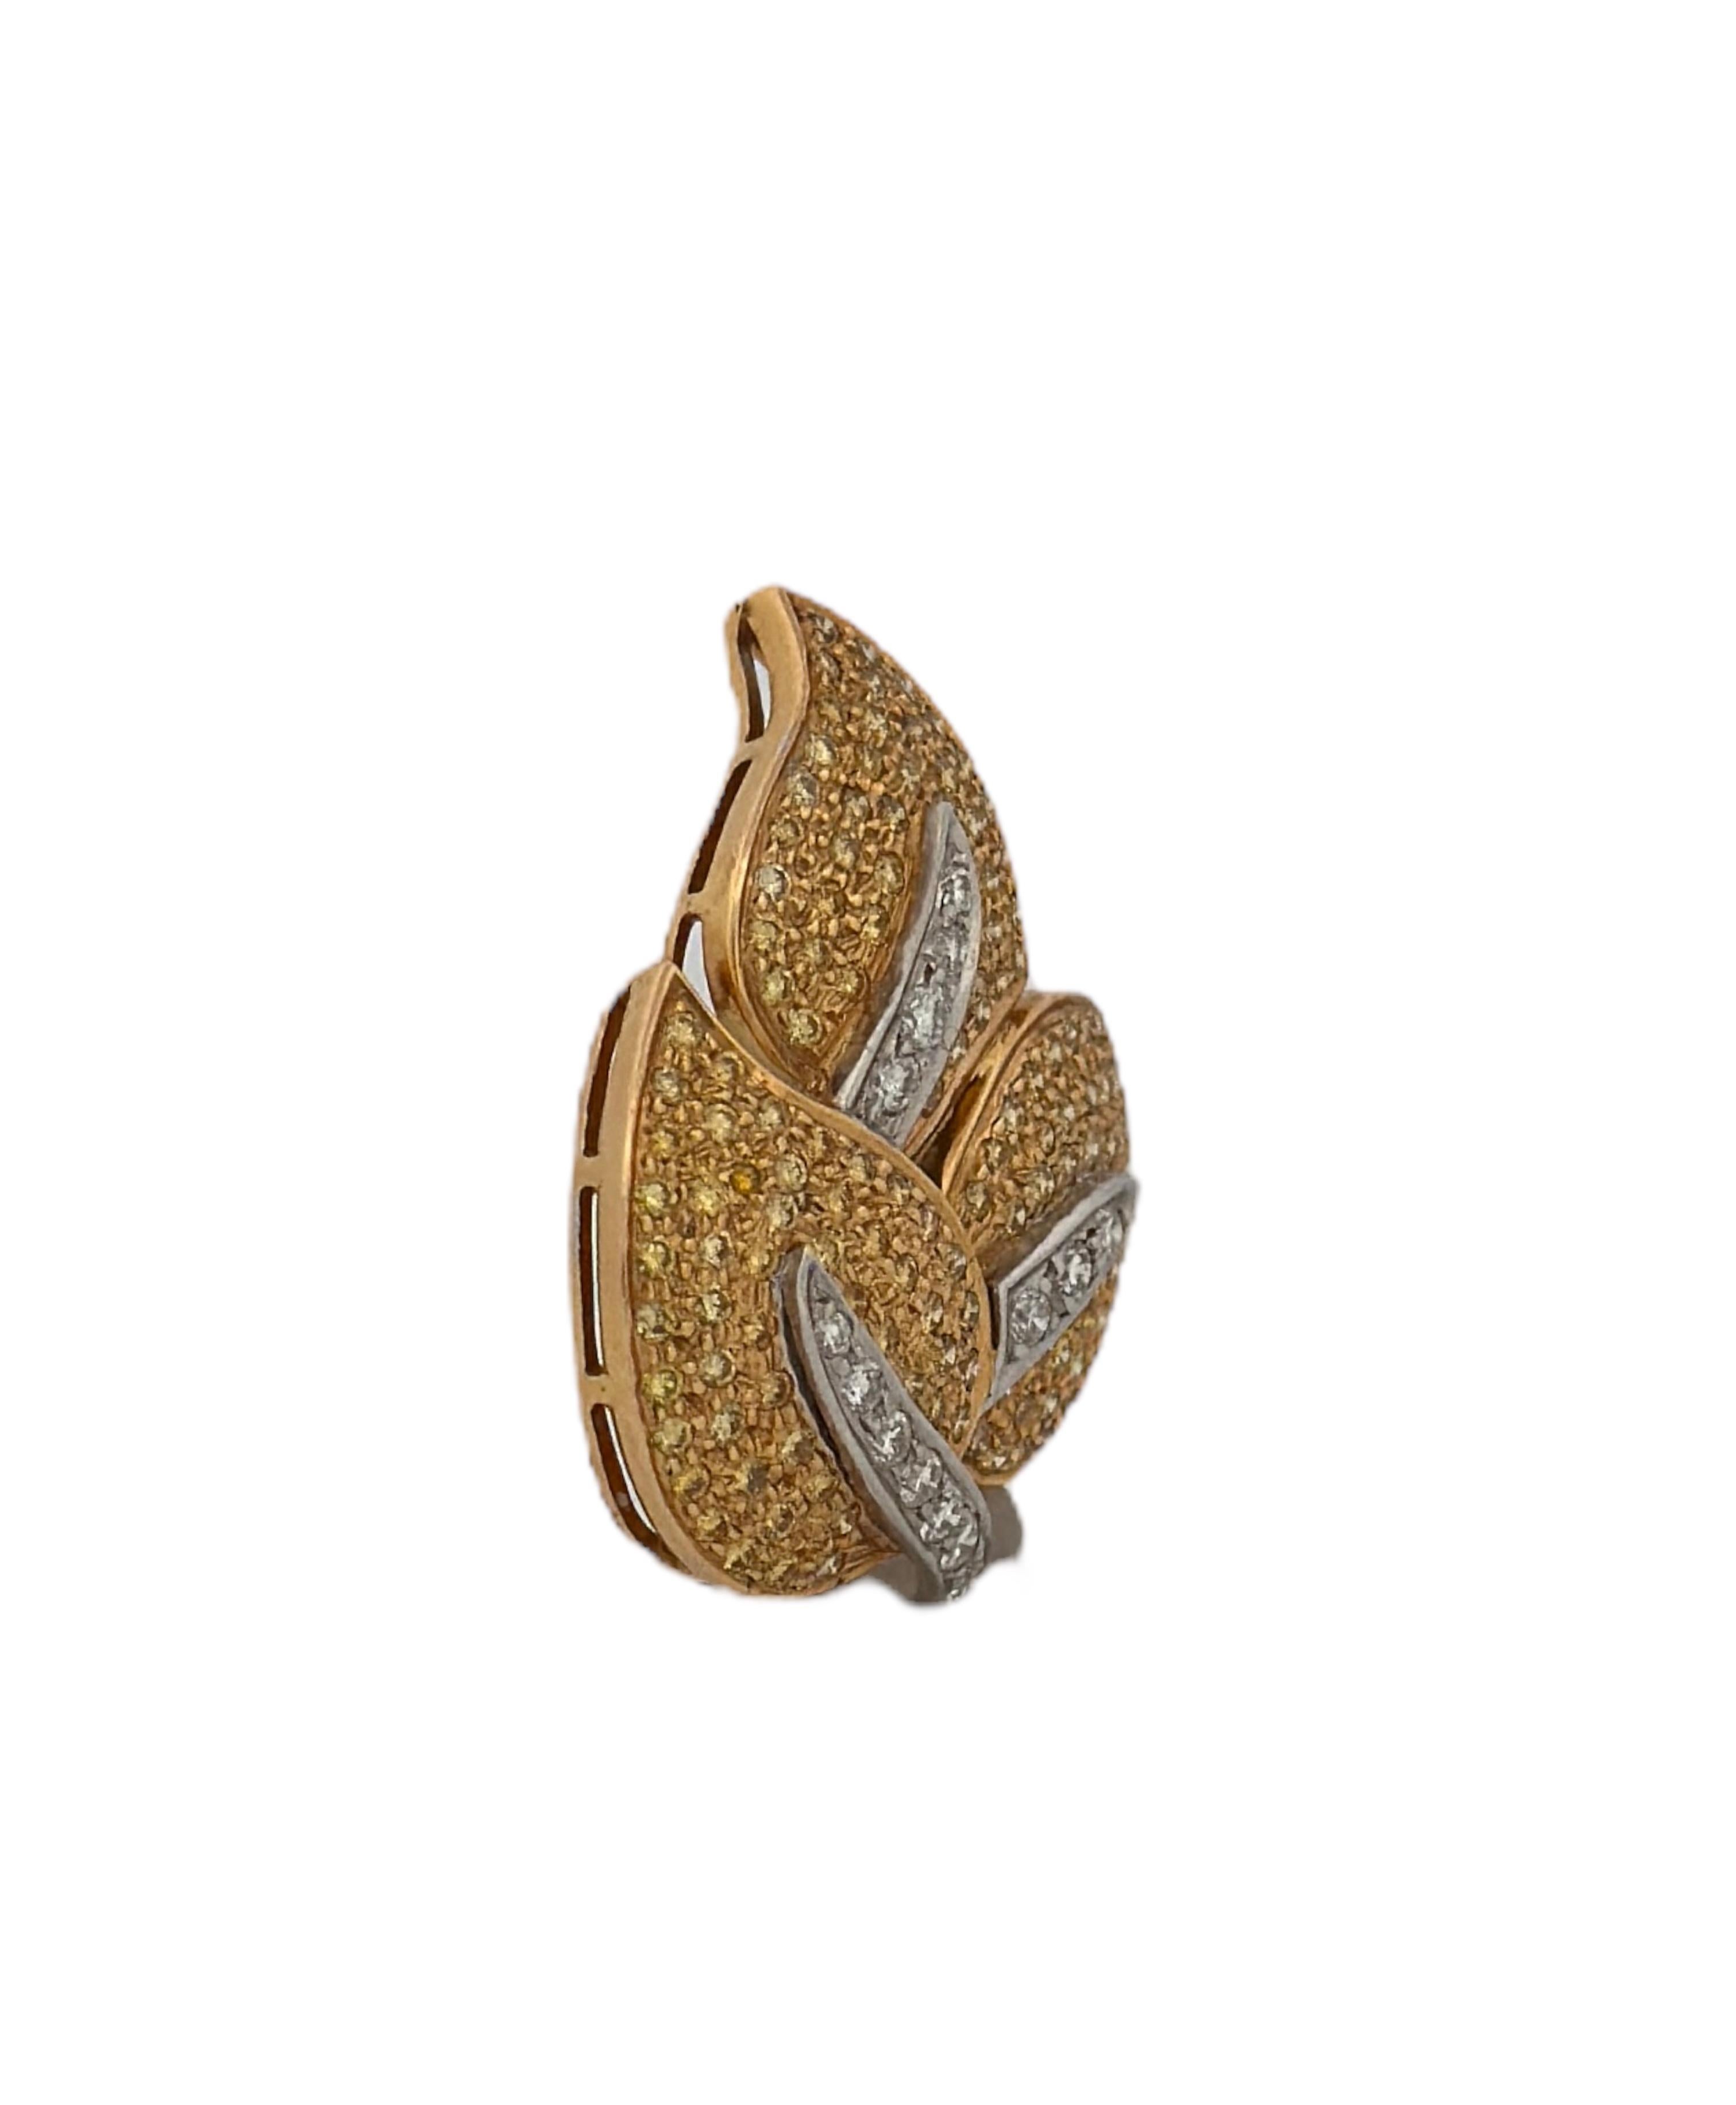 These Yellow and White Color Diamond Pendant, a product of the year 2001, is a captivating fusion of sophistication and nature-inspired design. With a total diamond weight of 1.76 carats, this pendant exhibits a beautiful harmony between the vivid